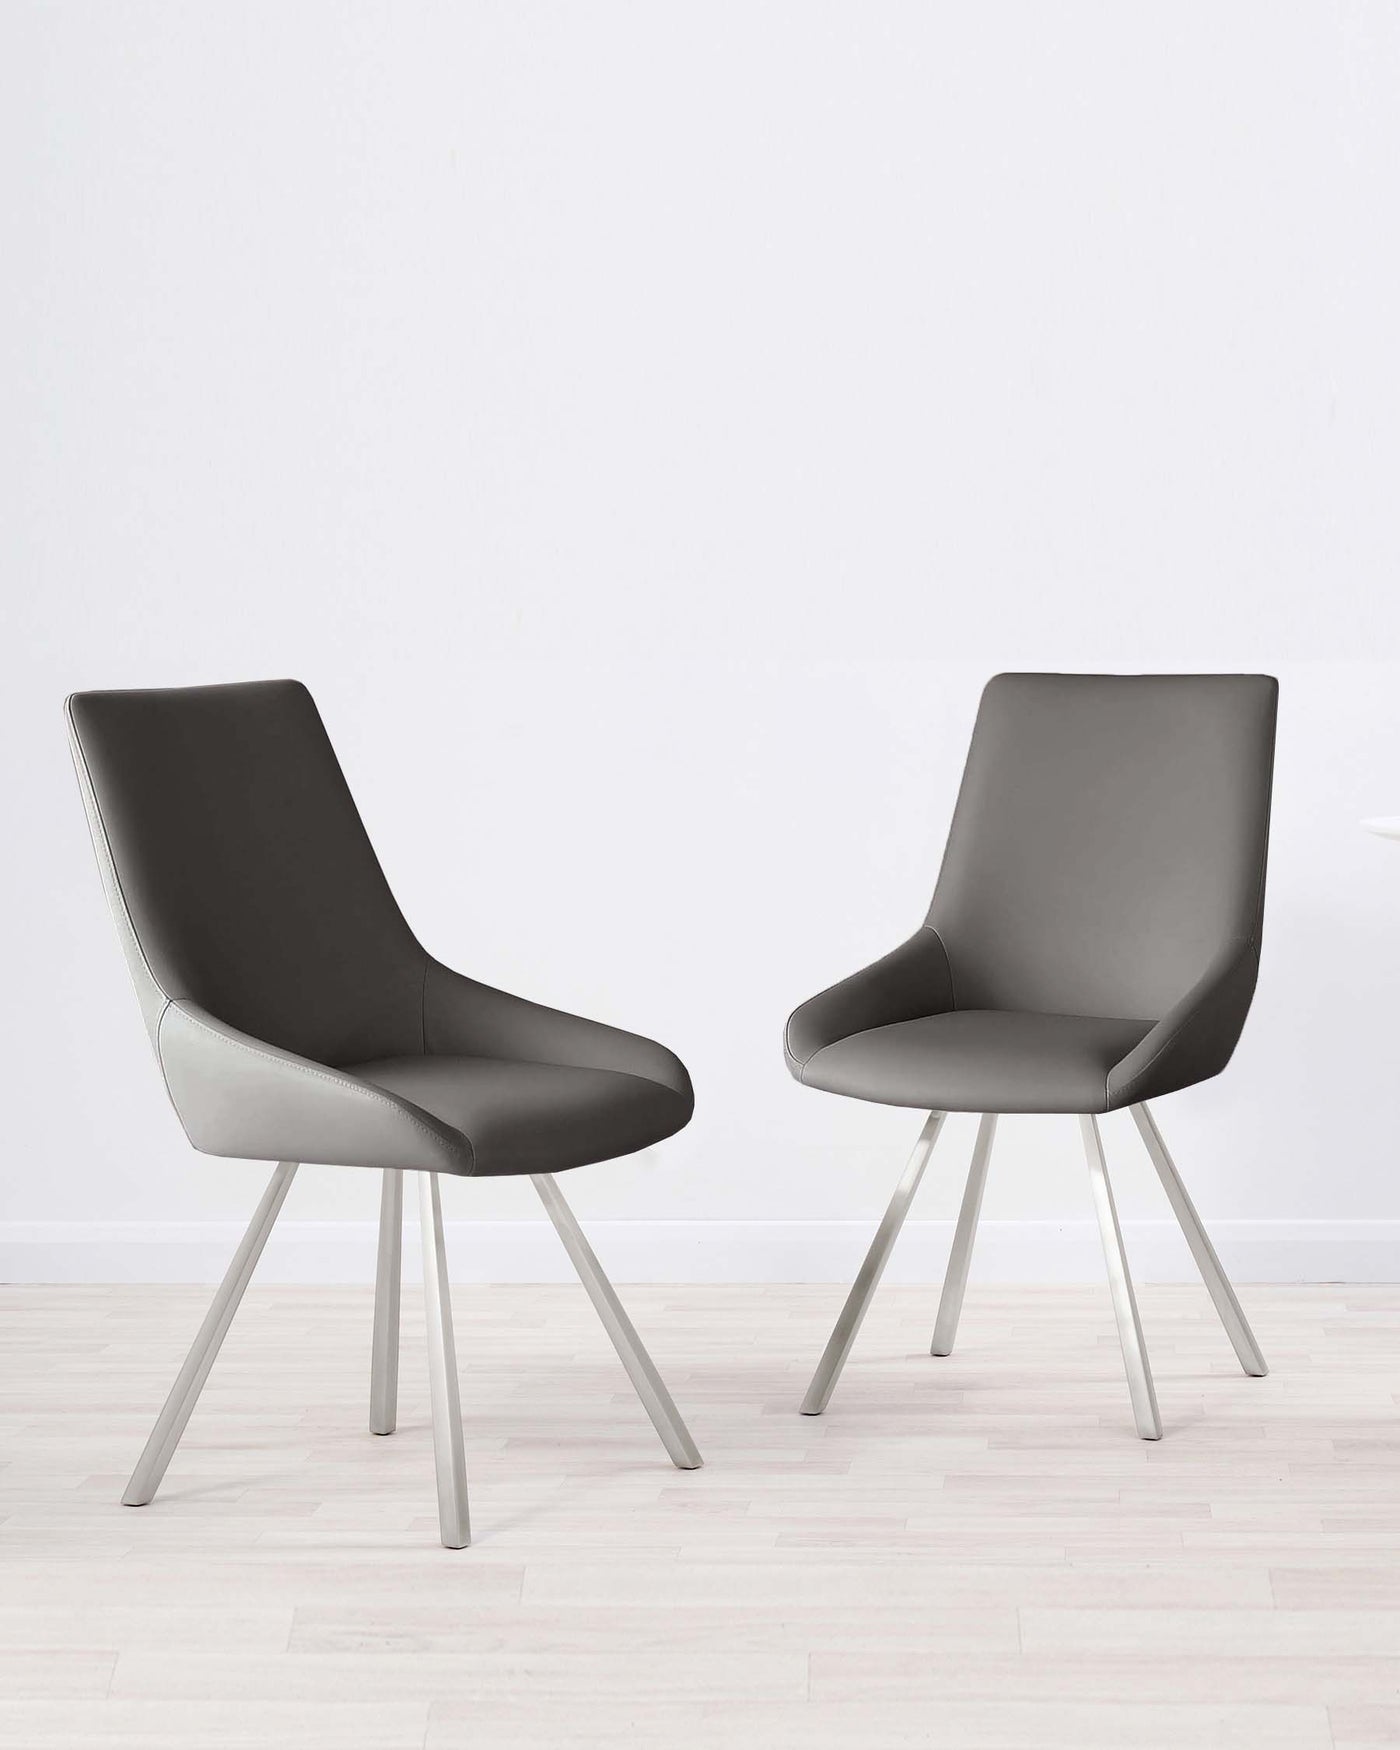 Theo Dark Grey Faux Leather Dining Chair - Set of 2